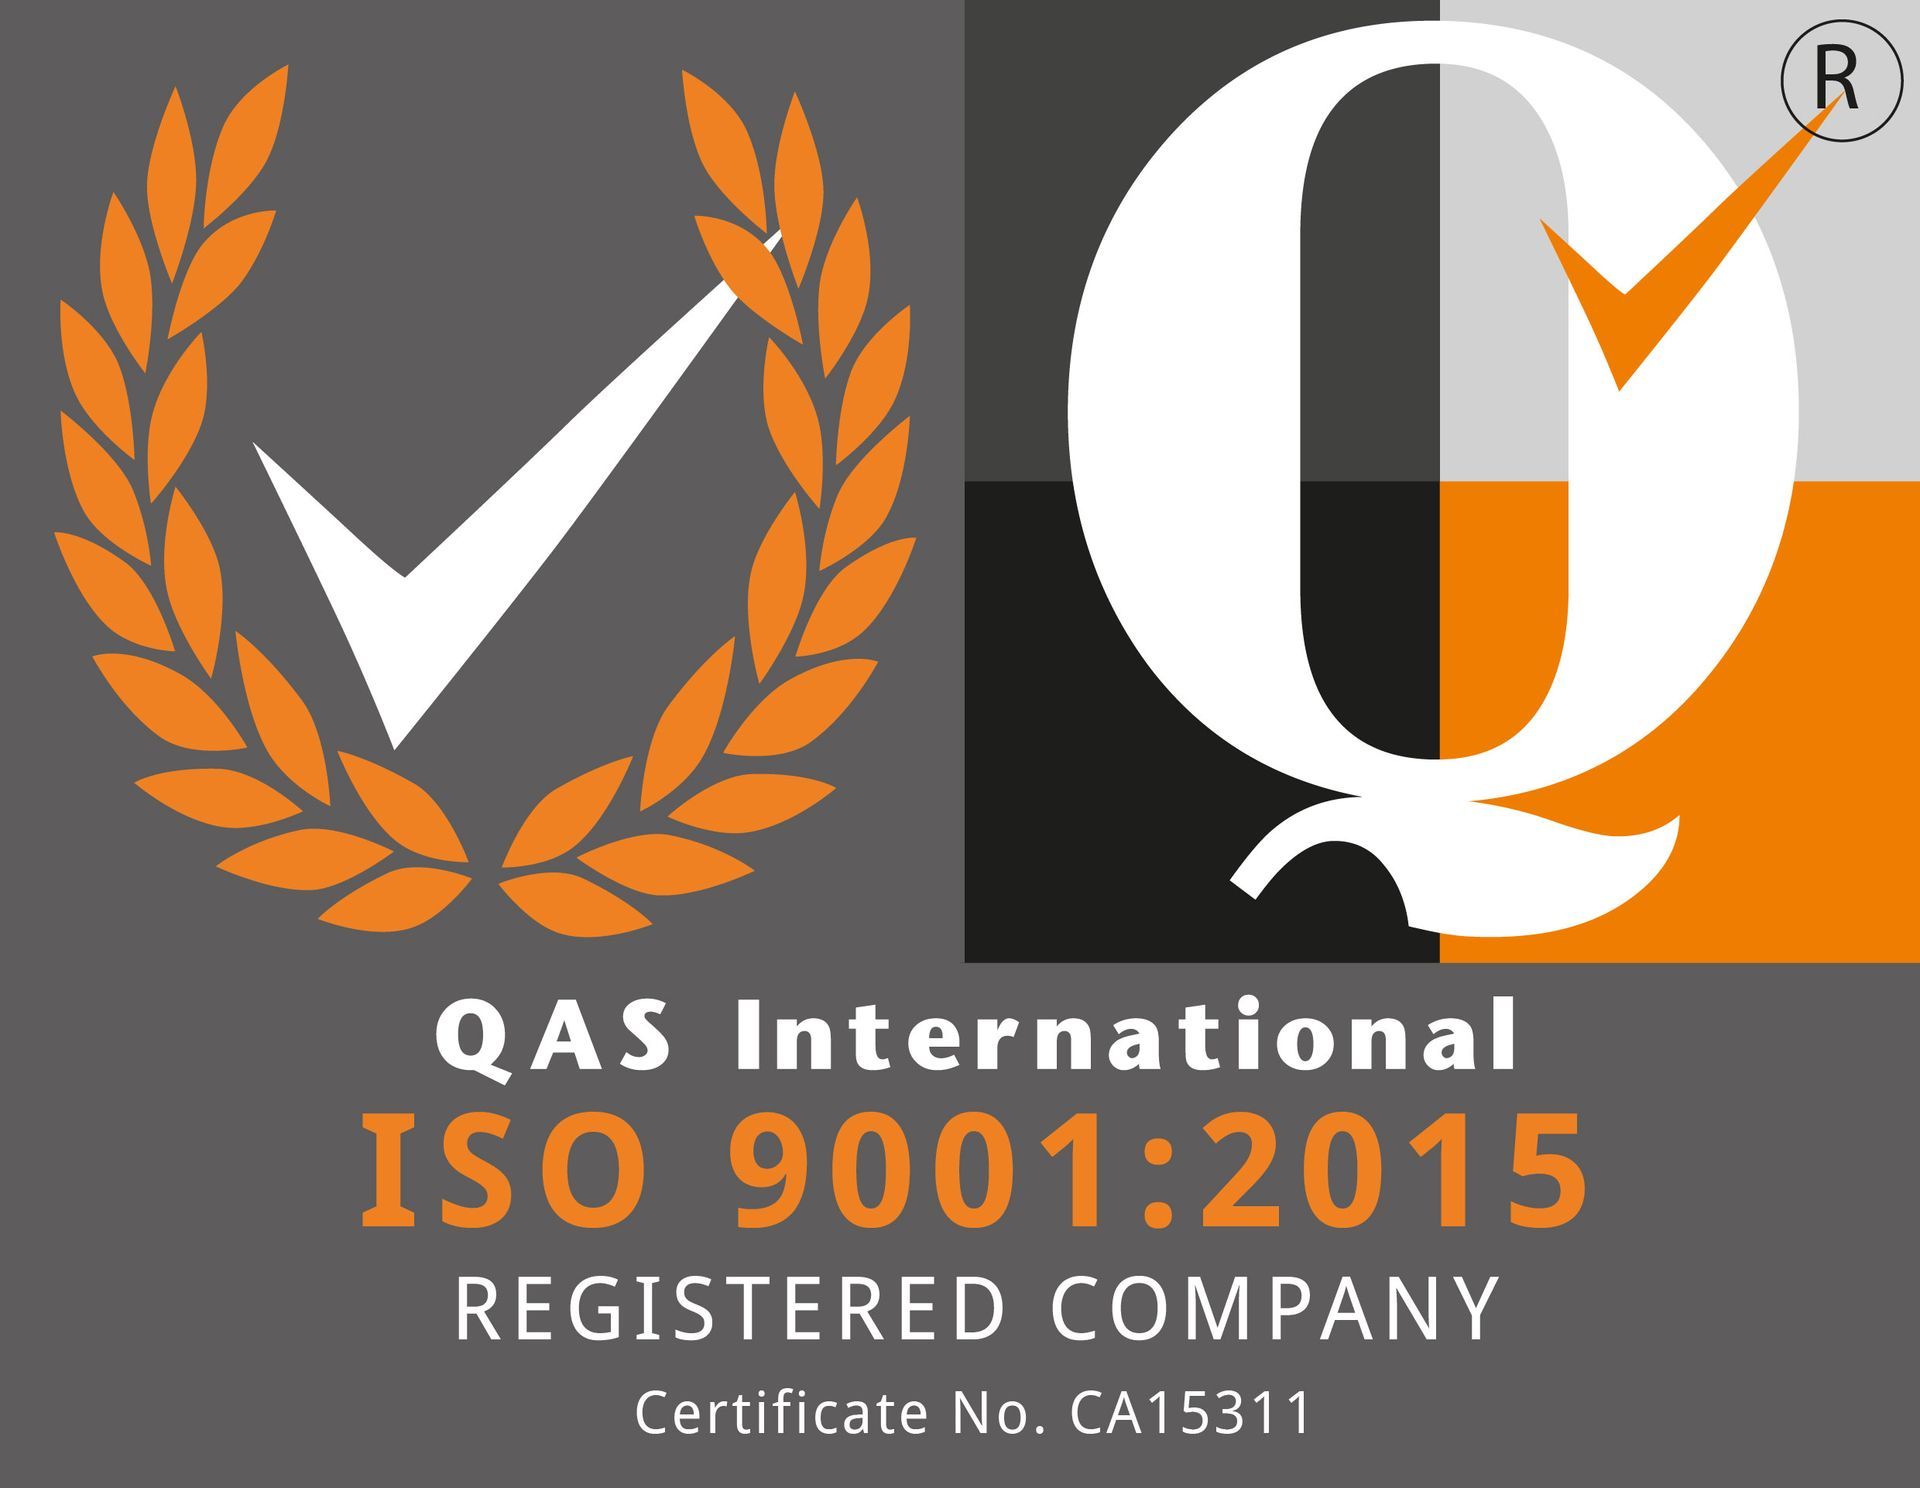 CCS ISO 9001 Quality Registered